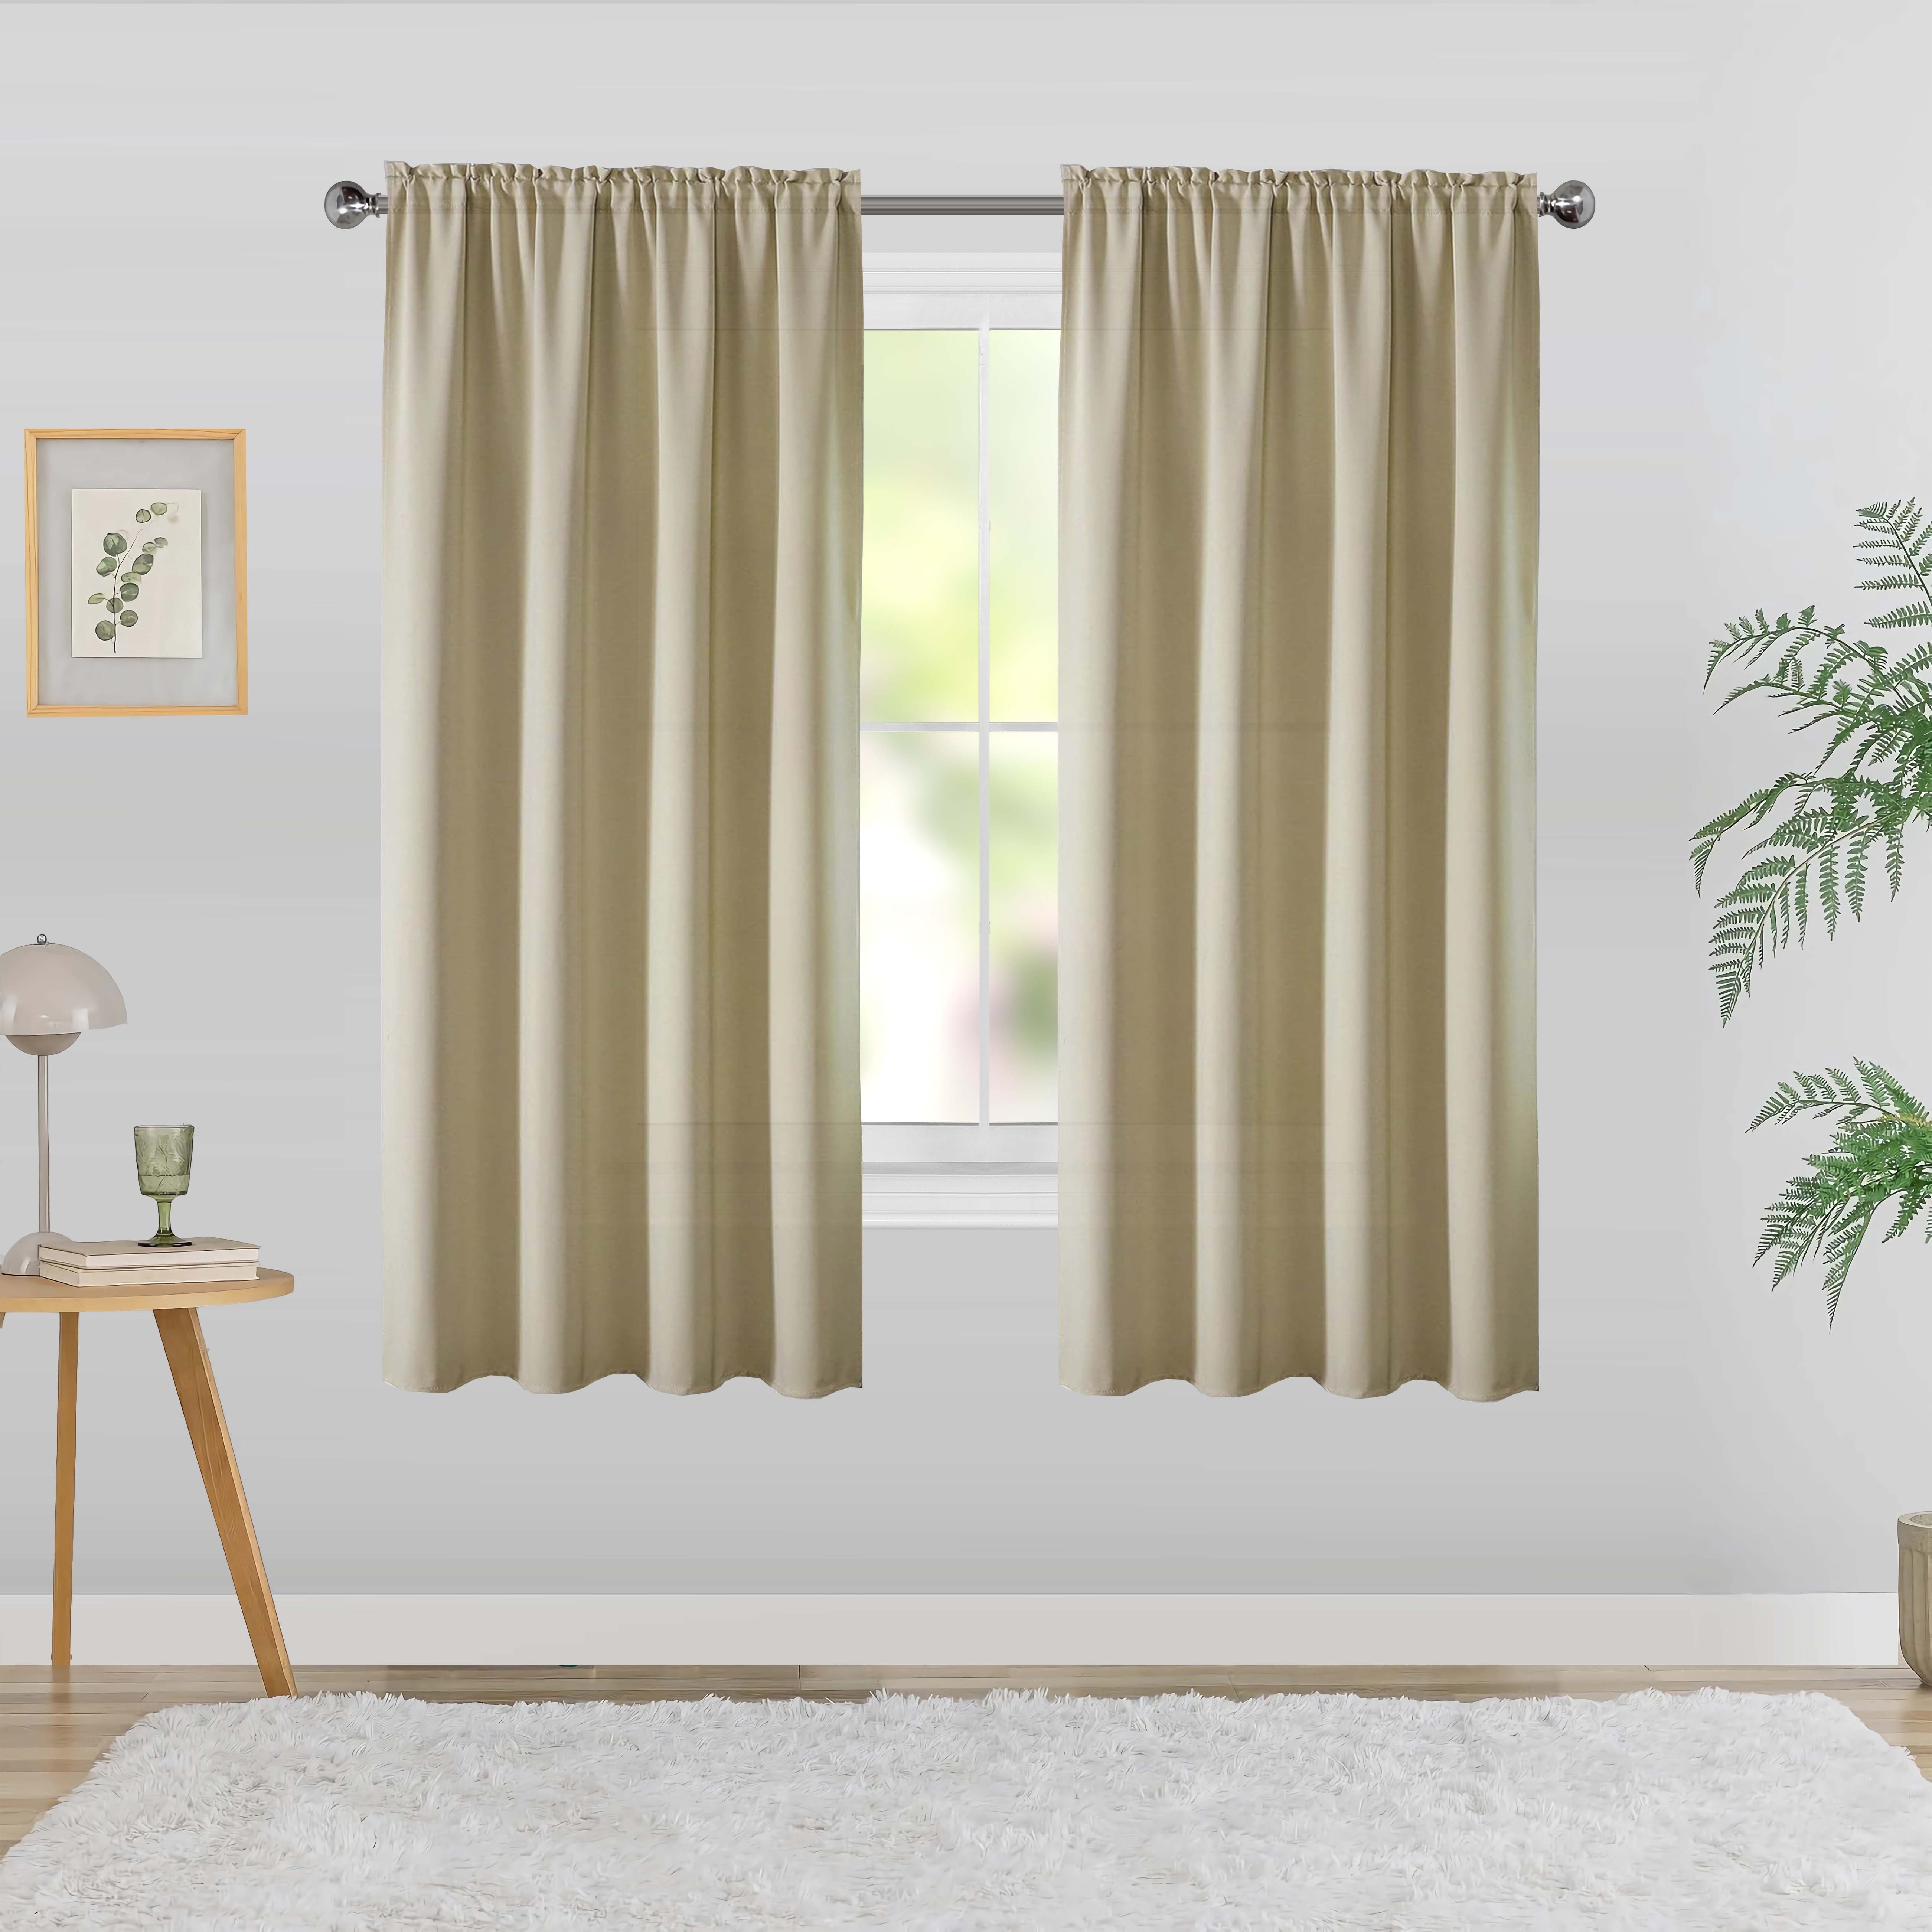 2pcs solid color light filtering curtains rod pocket window treatments curtain drapes suitable for living room bedroom office home decor